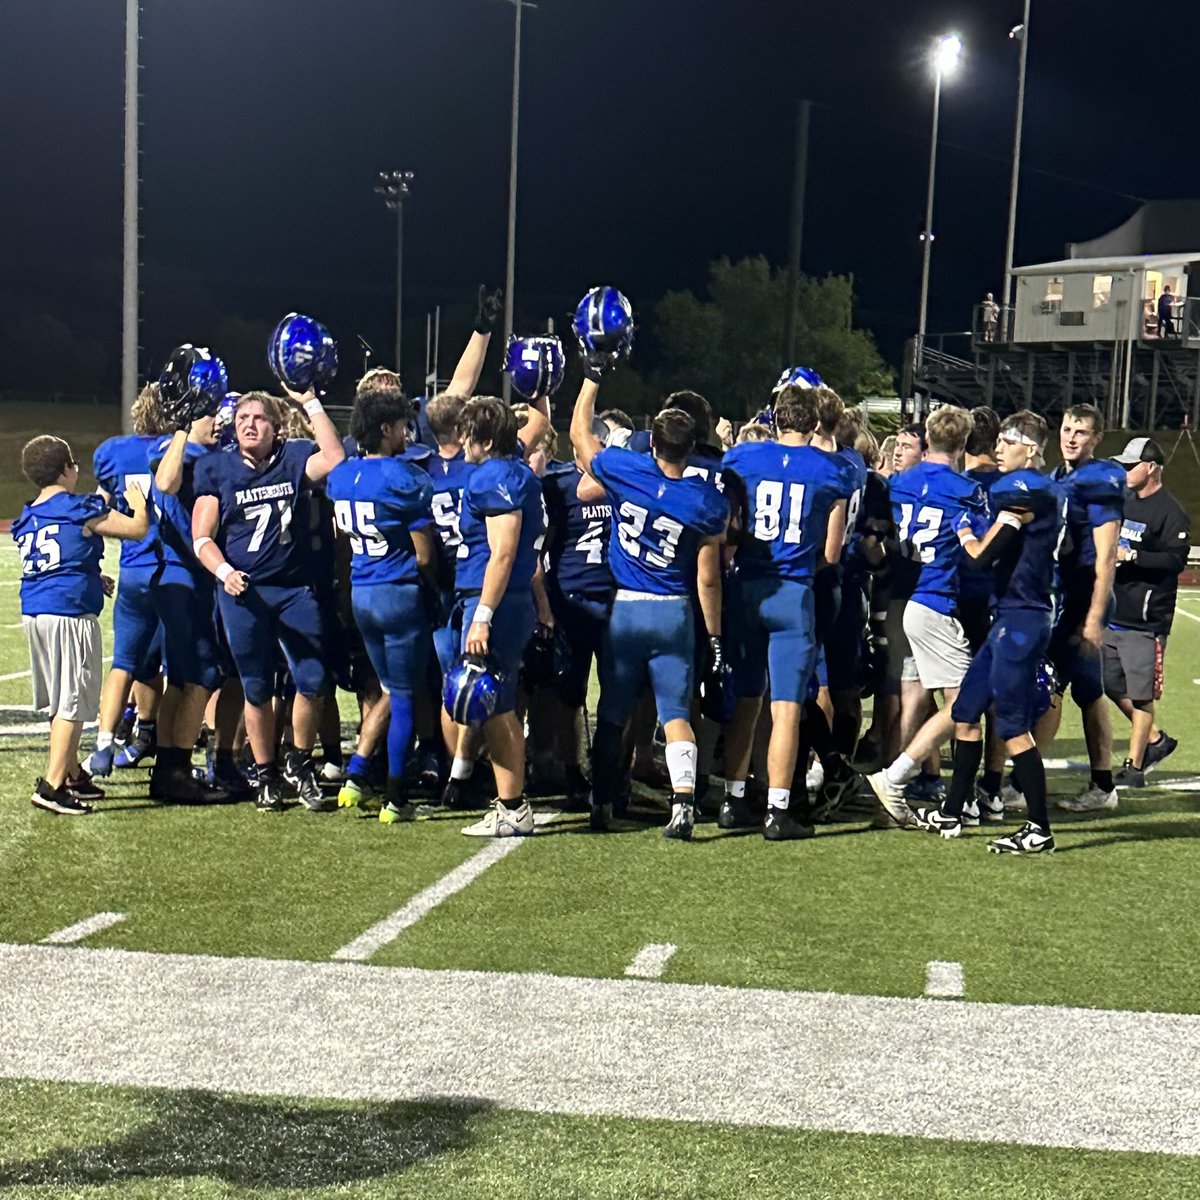 What a fantastic Homecoming game! Plattsmouth Blue Devils pulled out a victory against Beatrice 52-14. #PHShomecoming2023 #PlattsmouthPRIDE #PlattsmouthFootball #GoBlueDevils